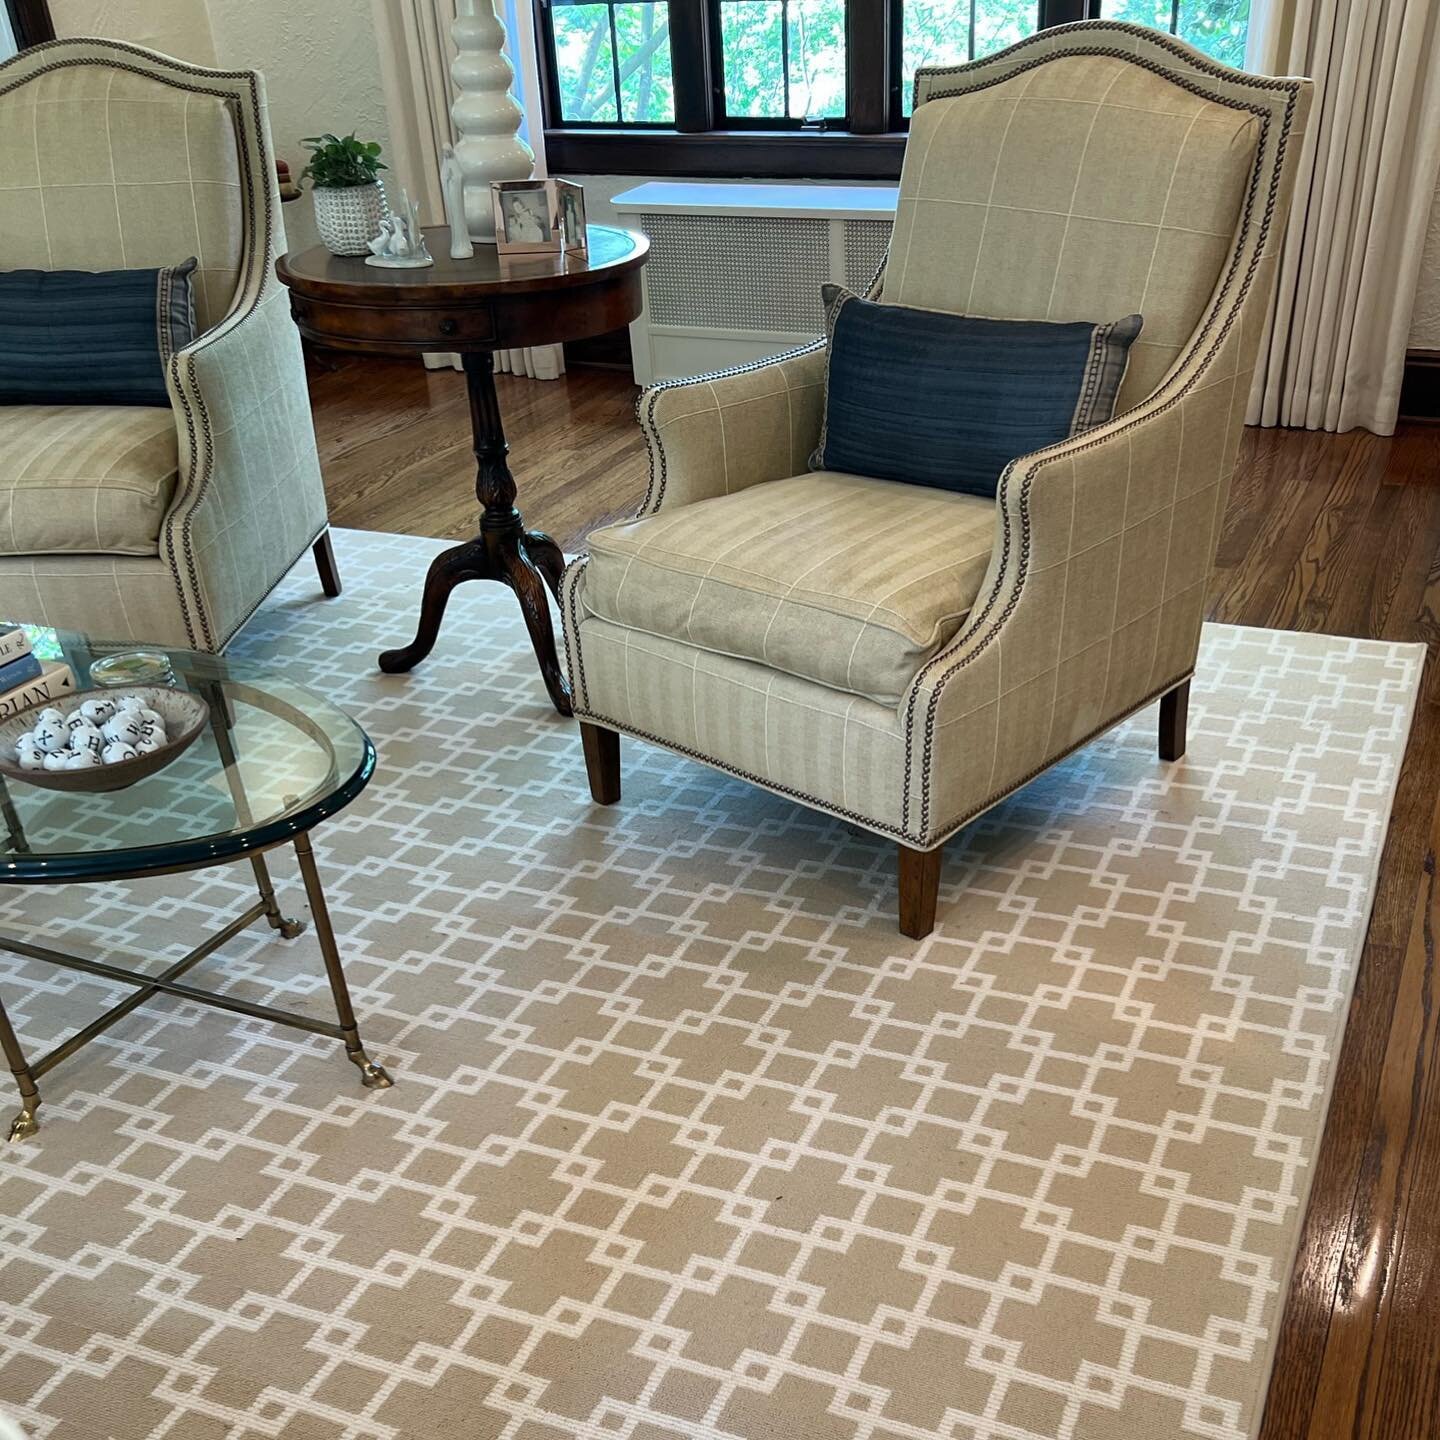 Gorgeous! Neutral Rug
10&rsquo;5&rdquo; x 14&rsquo;4&rdquo; $250
Club Chair from Donna Donaldson 43h x 30w 
$475 Round Wood Table with Leather Top and 2 Drawers 30.25h x 26 round 
$200 #emptyyournest #interiordesign #interiordesigner #homedecor #livi